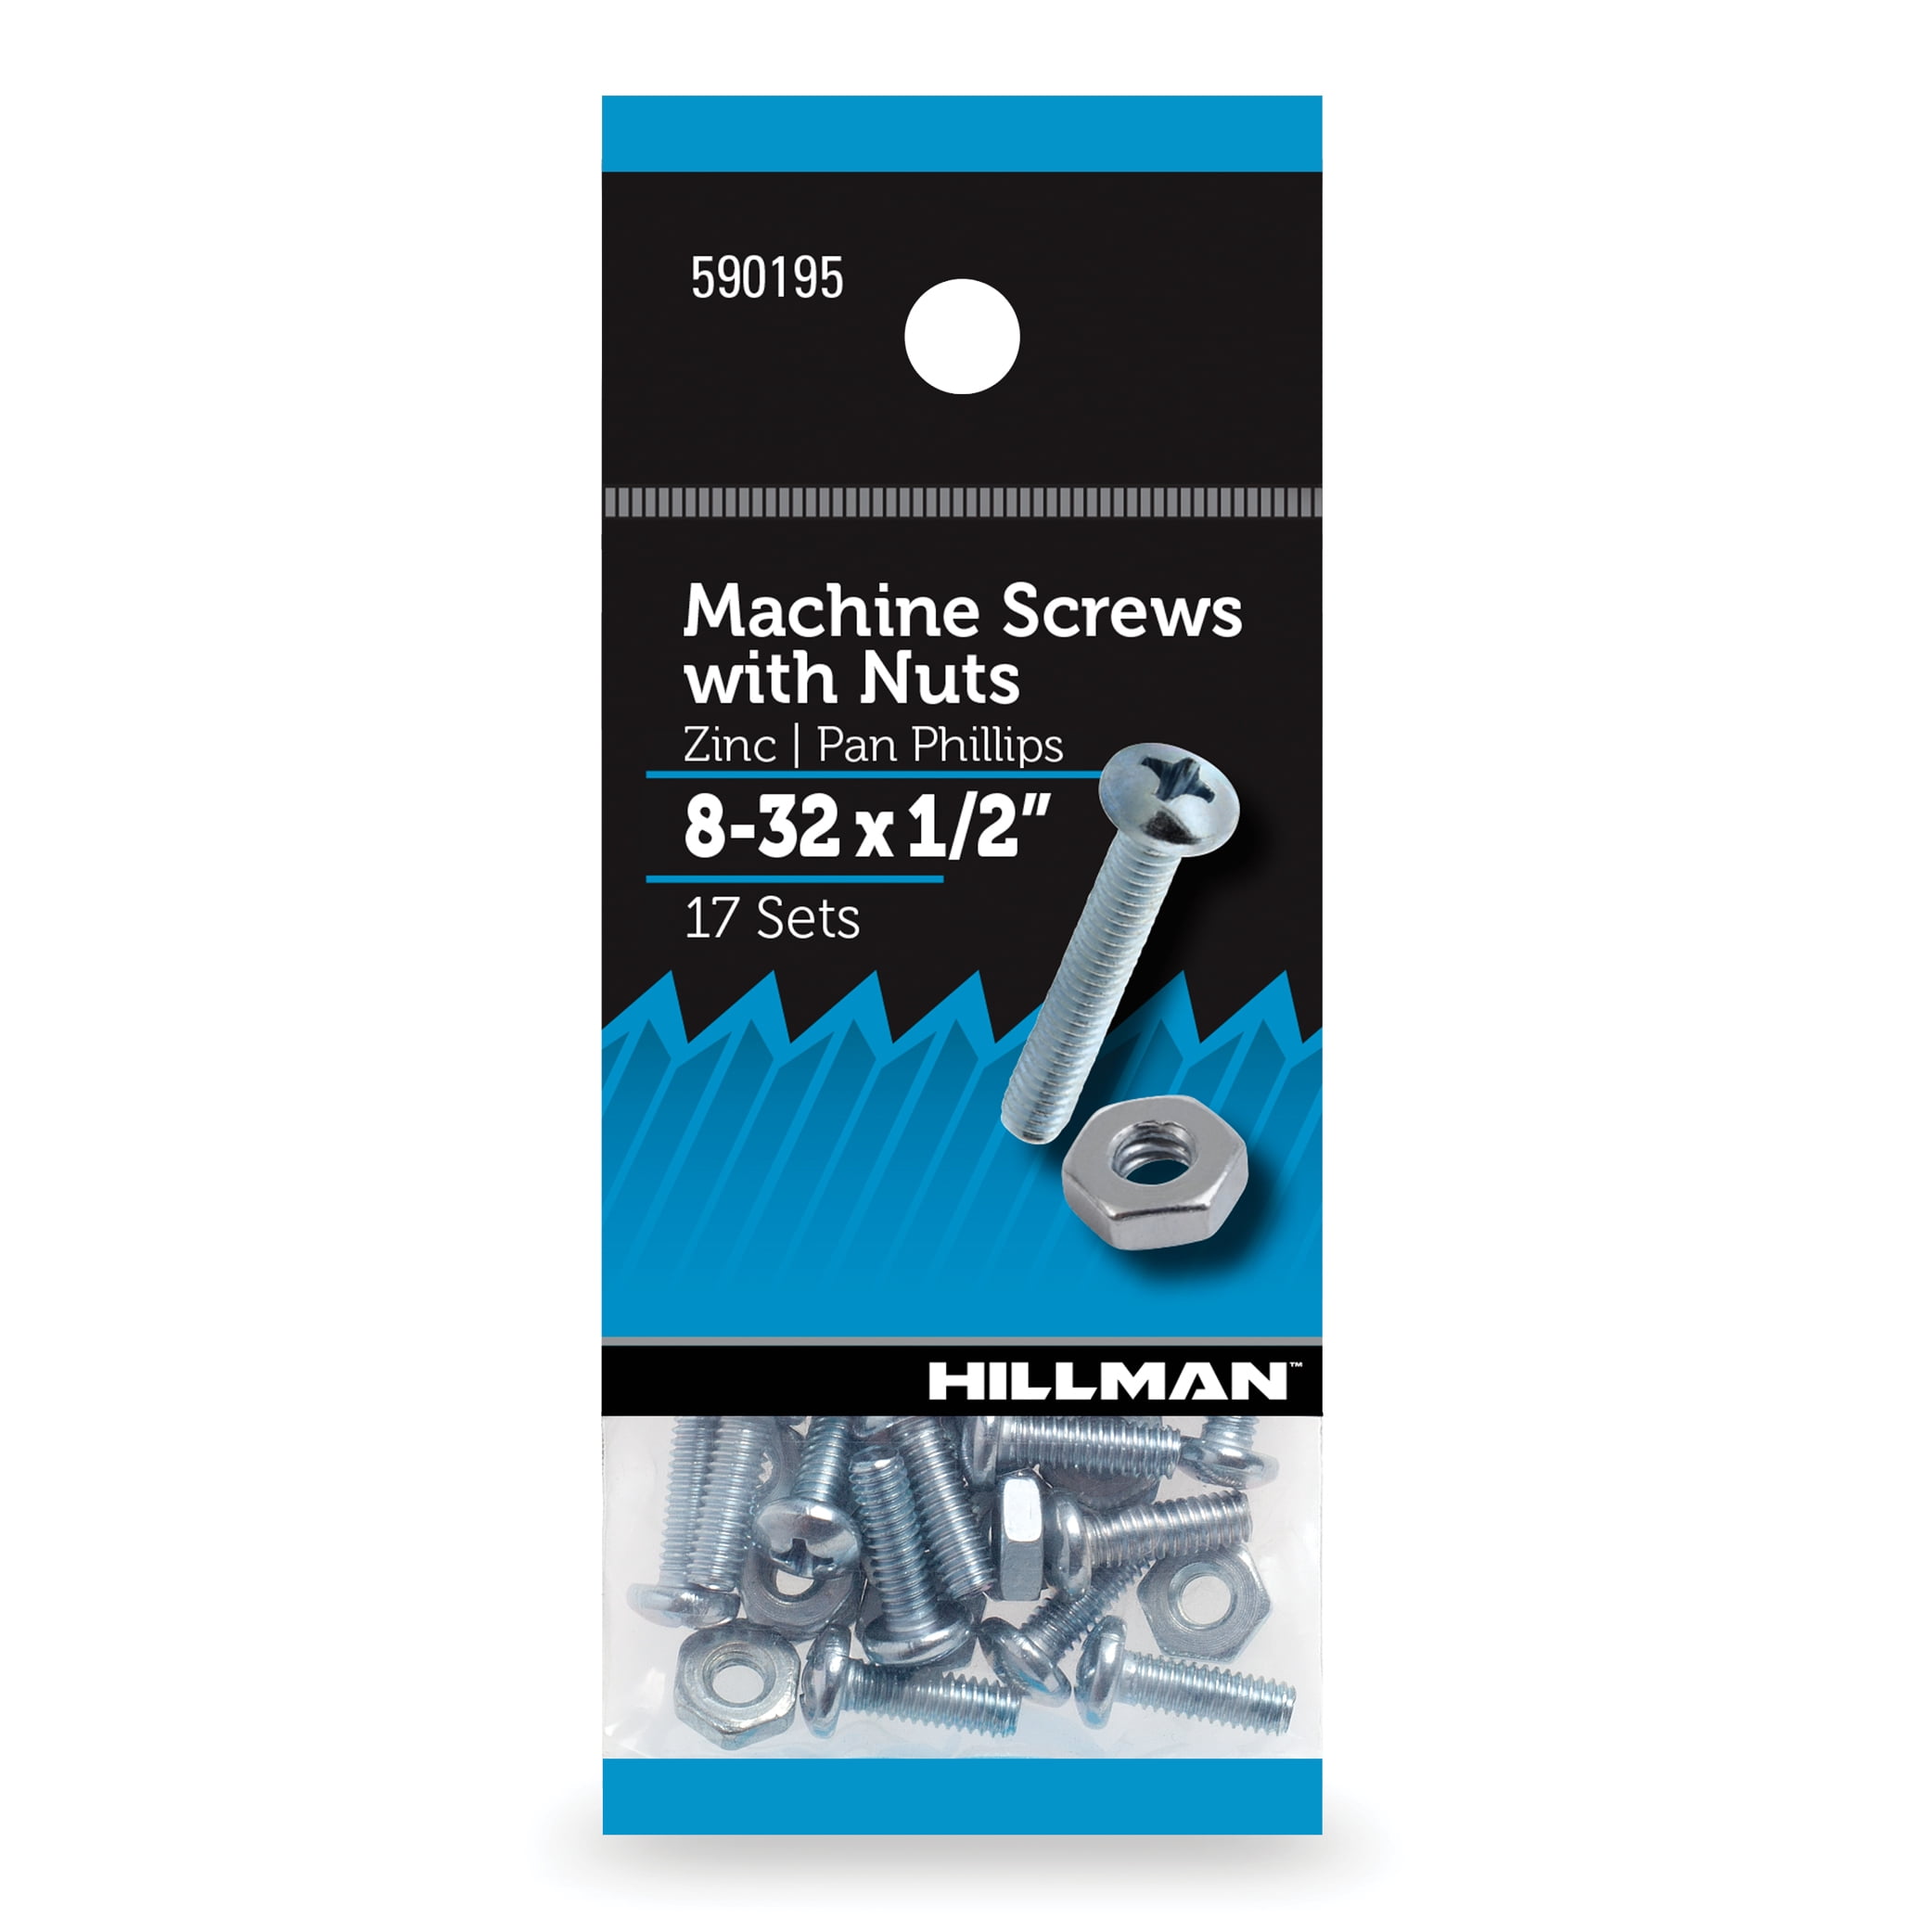 1 Pack The Hillman Group 130205 Machine Screws and Nut Kit 